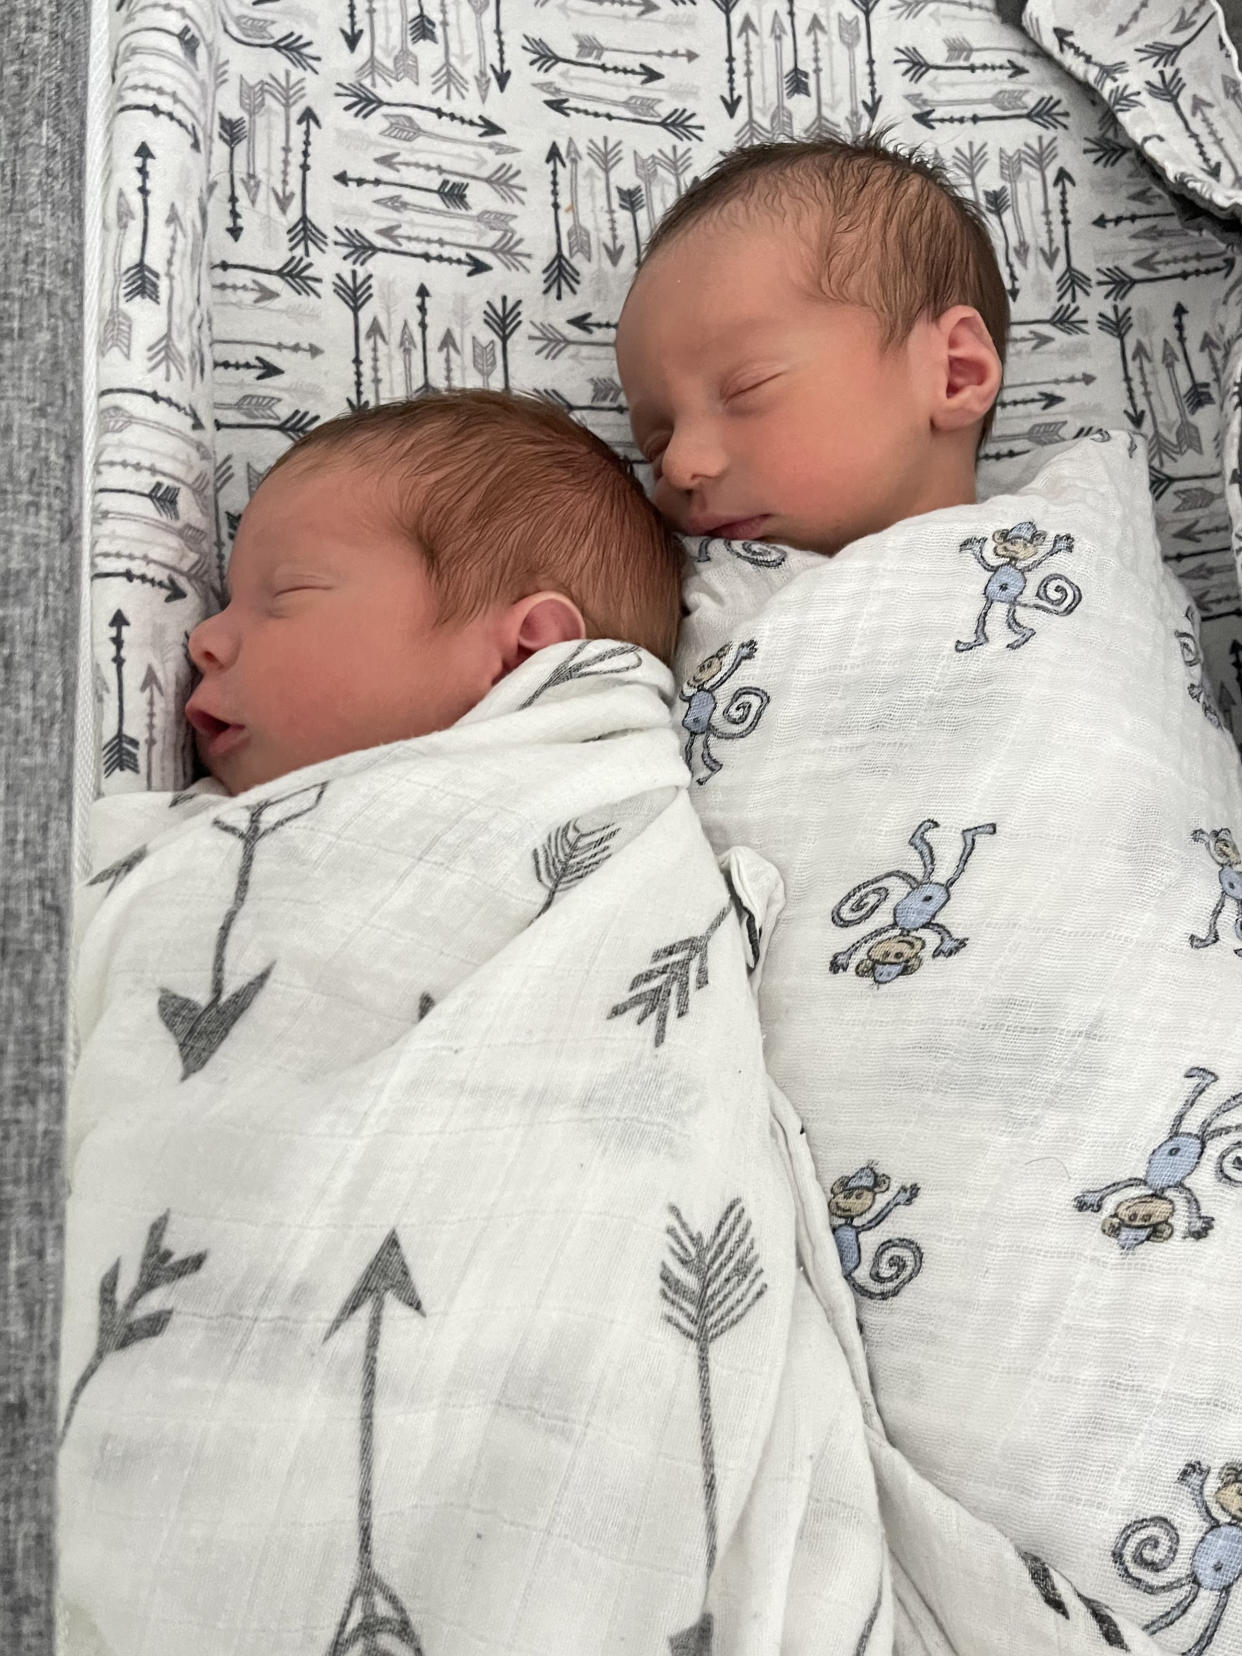 Mykelti Brown welcomes twins (Courtesy Mykelti Padron)